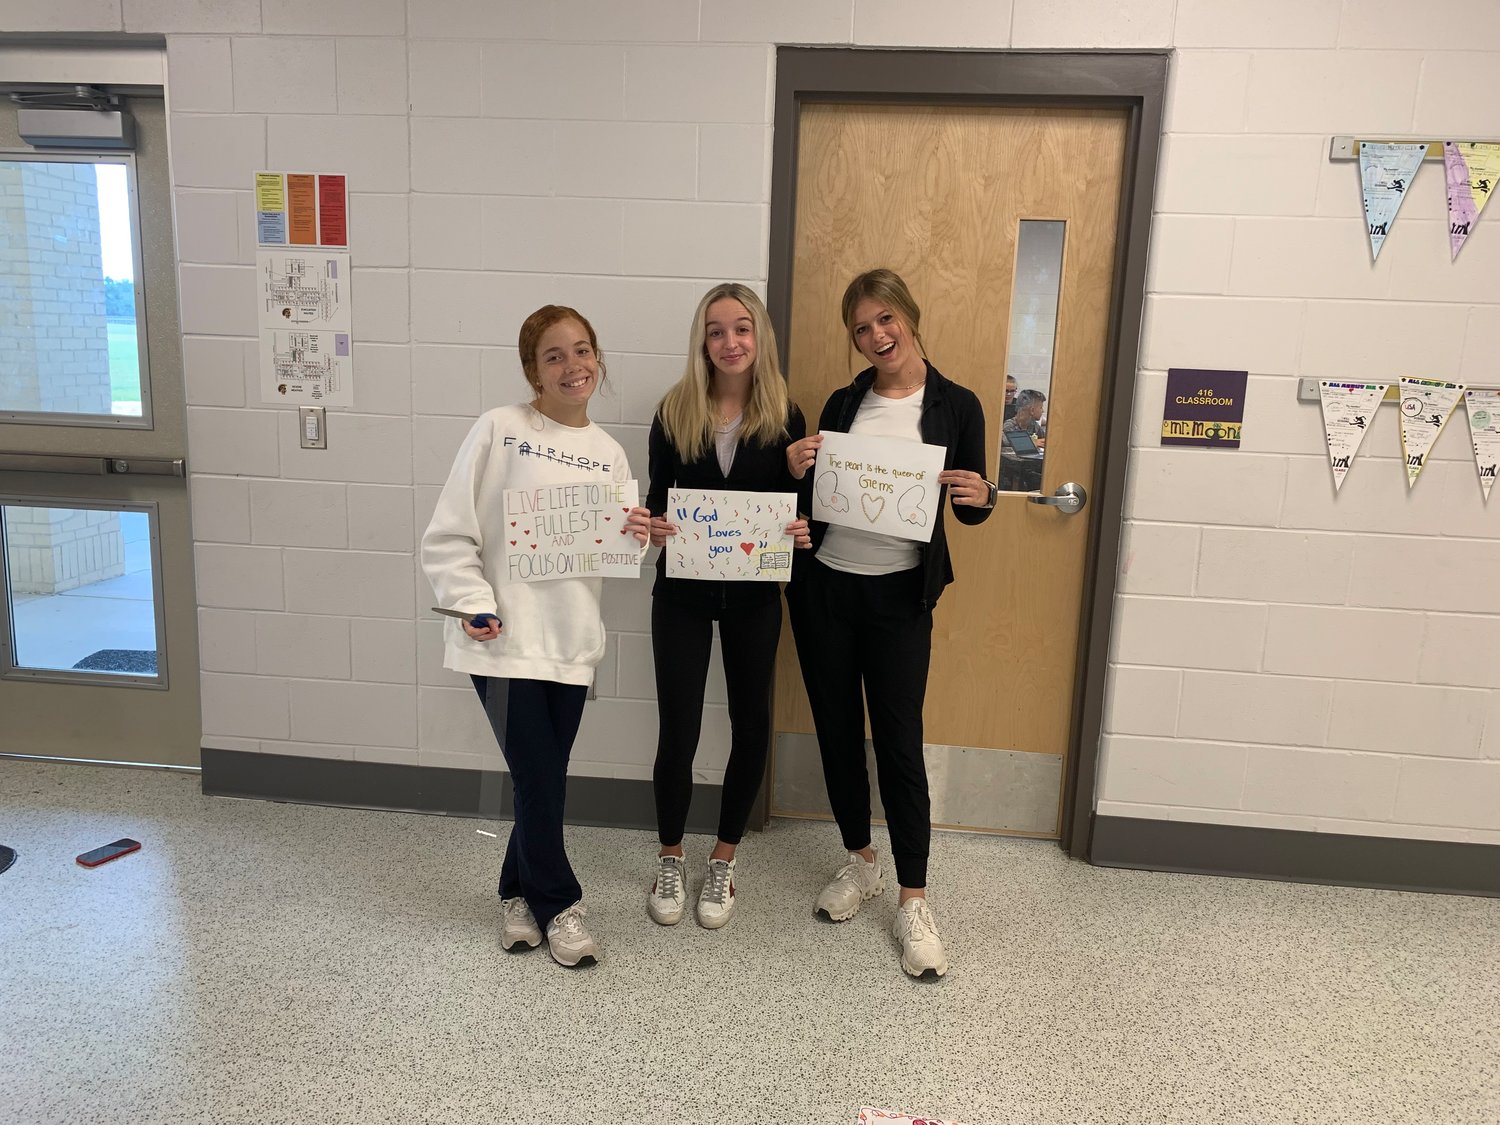 Daphne Middle School teacher Tiffany Holt’s “pearls” are spreading positivity throughout the school halls. One of their first impacts was to create posters filled with uplifting messages to share with their peers. Using posters to spread positivity is a top activity Emma Dumas, DMS Kindness Club creator, wants to see continued.